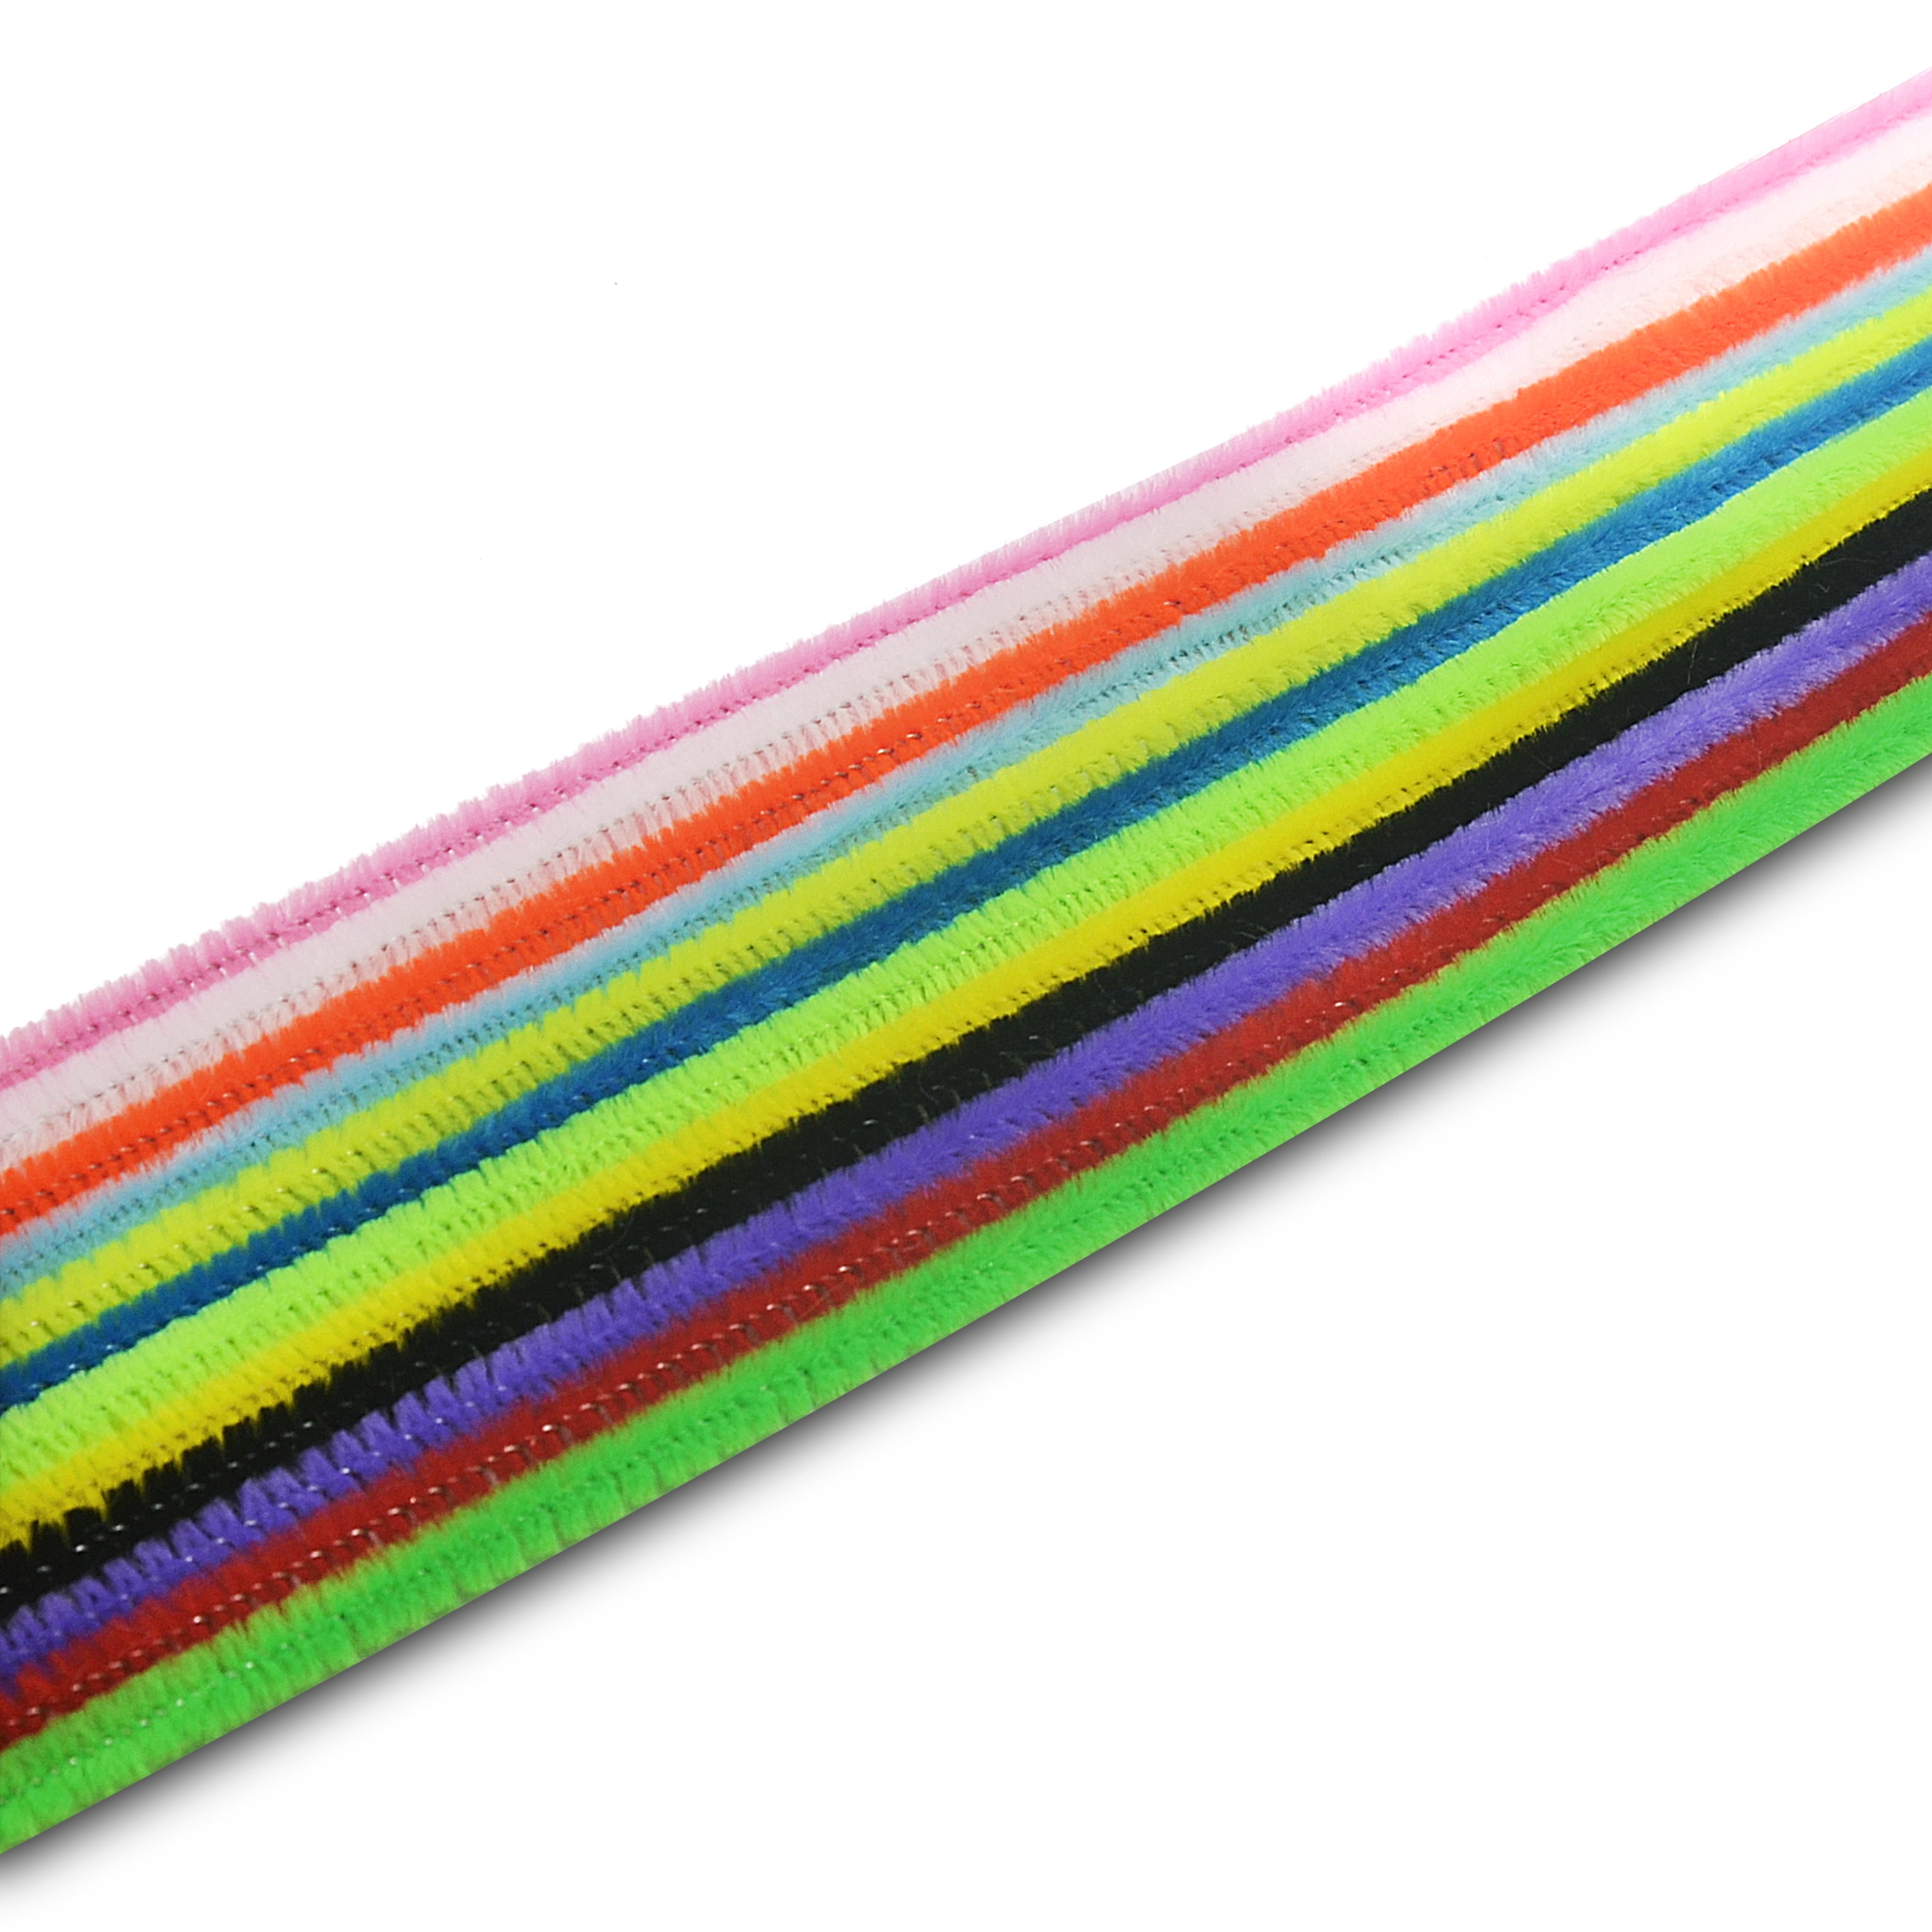 Neon Stems Pipe Cleaners, 6mm X 12 Inch, 100 Pack Blue Green Yellow Orange  Felting Art Craft Animal Cousin DIY 